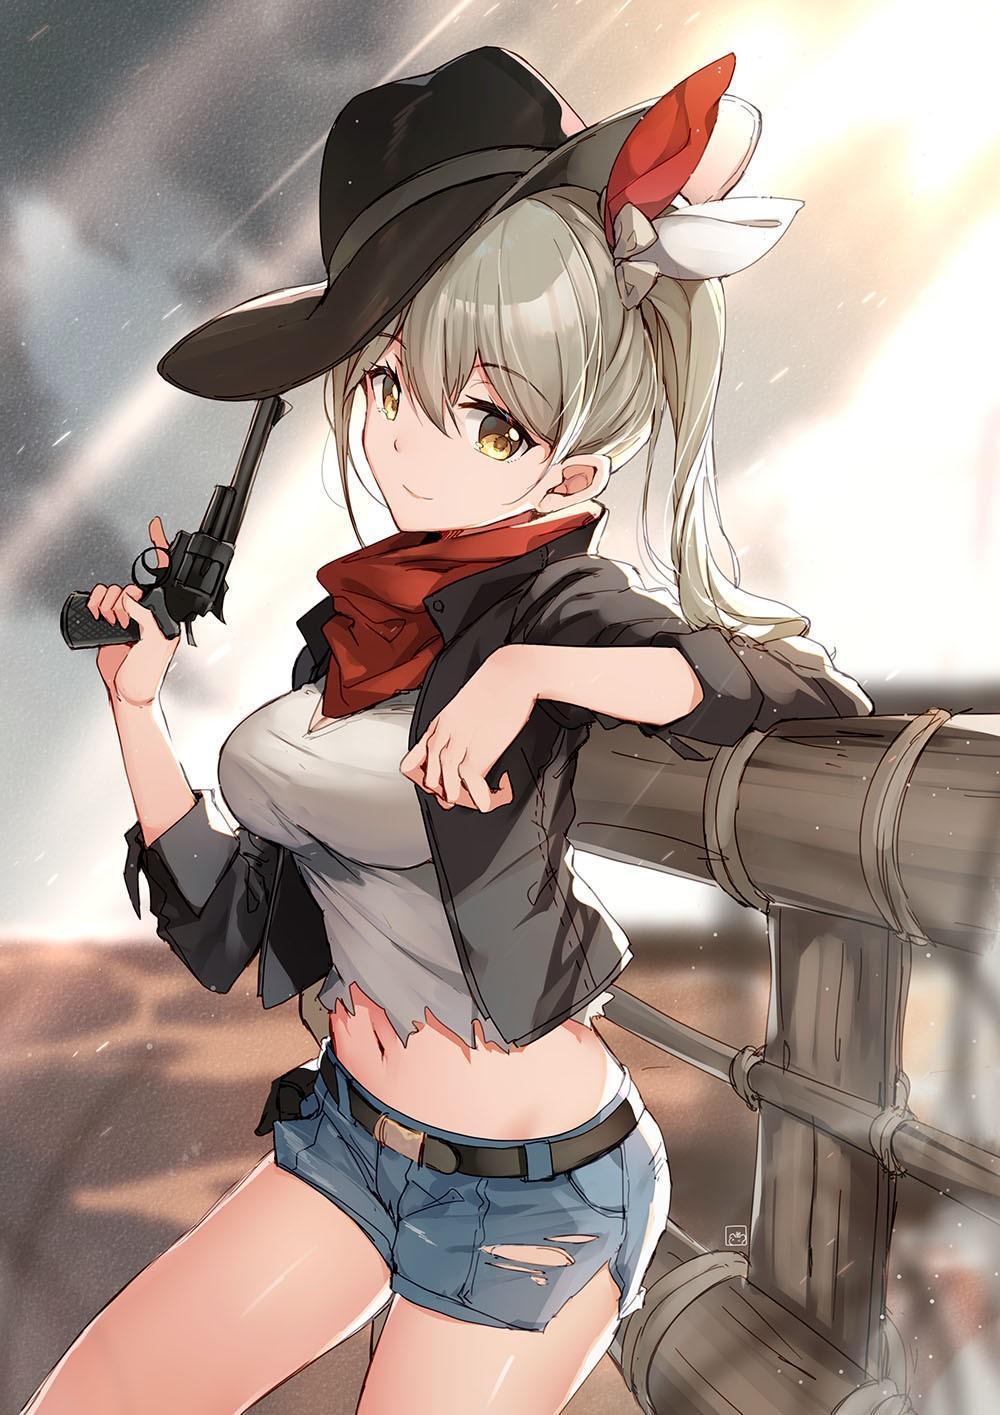 HD wallpaper, Anime Girls, Grey Hair, Artwork, Portrait Display, Gun, Cowgirl, Torn Clothes, Short Shorts, Anime, Digital Art, Bison Cangshu, 2D, Looking At Viewer, Side Ponytail, Scarf, Revolver, Cowboy Hats, Jean Shorts, Yellow Eyes, Belly, Vertical